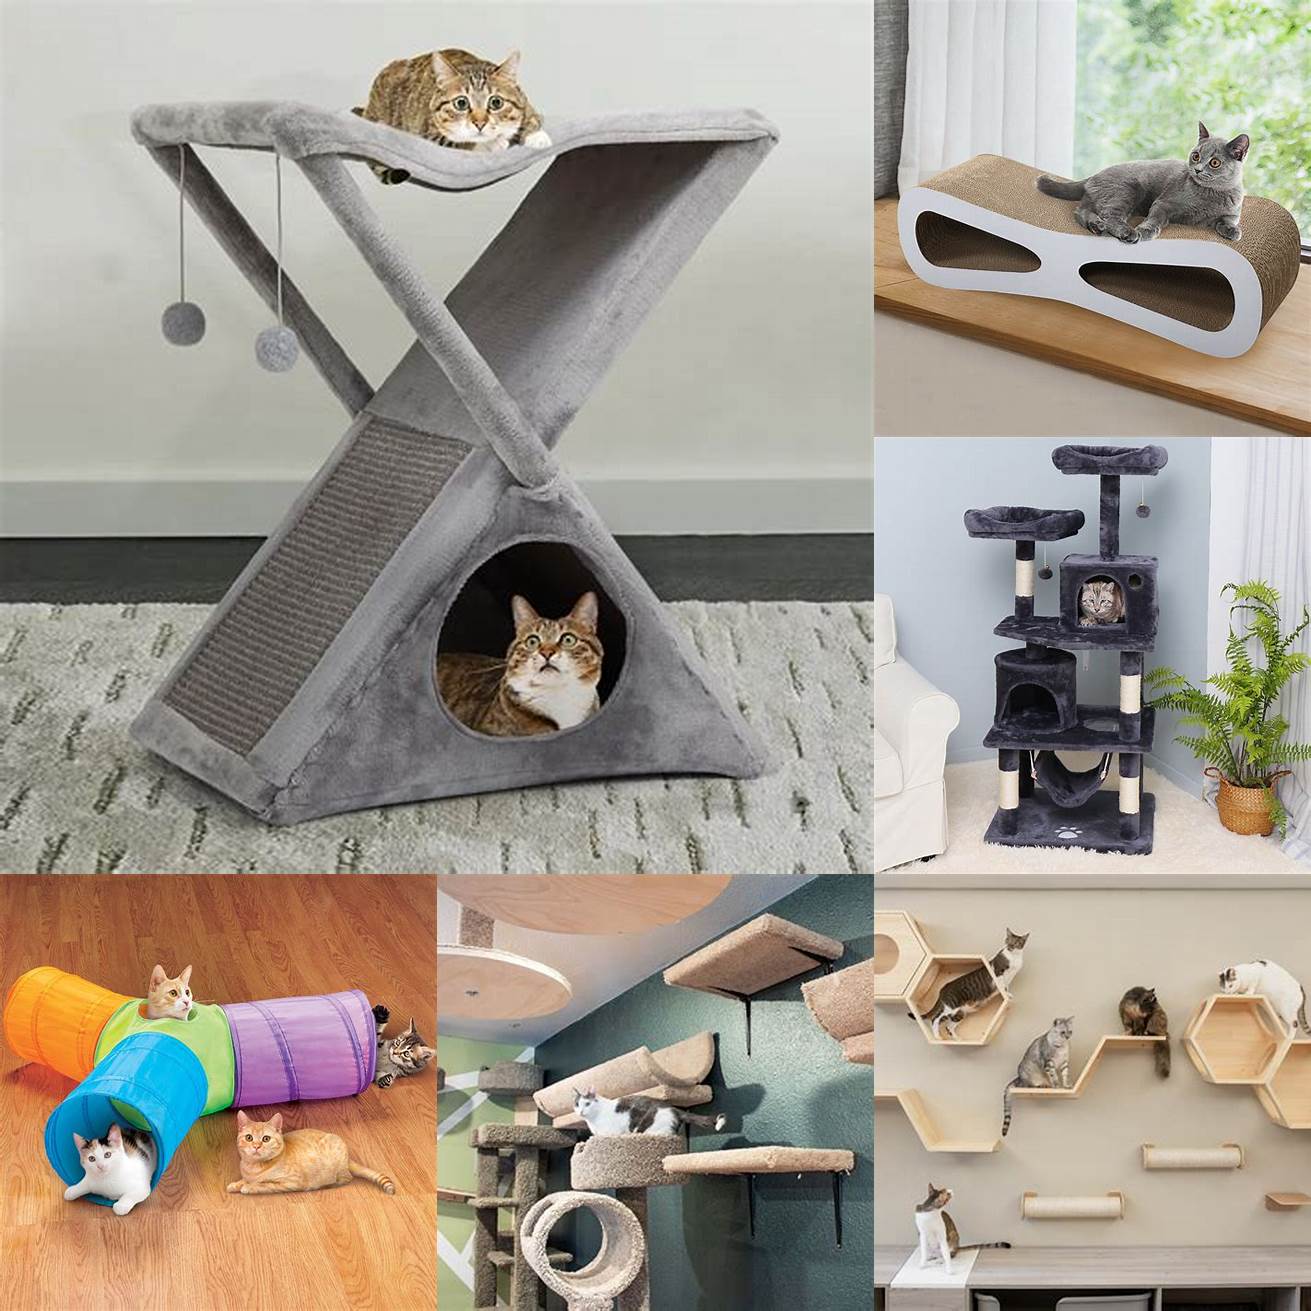 Provide plenty of comfortable spaces for your cat to rest and play